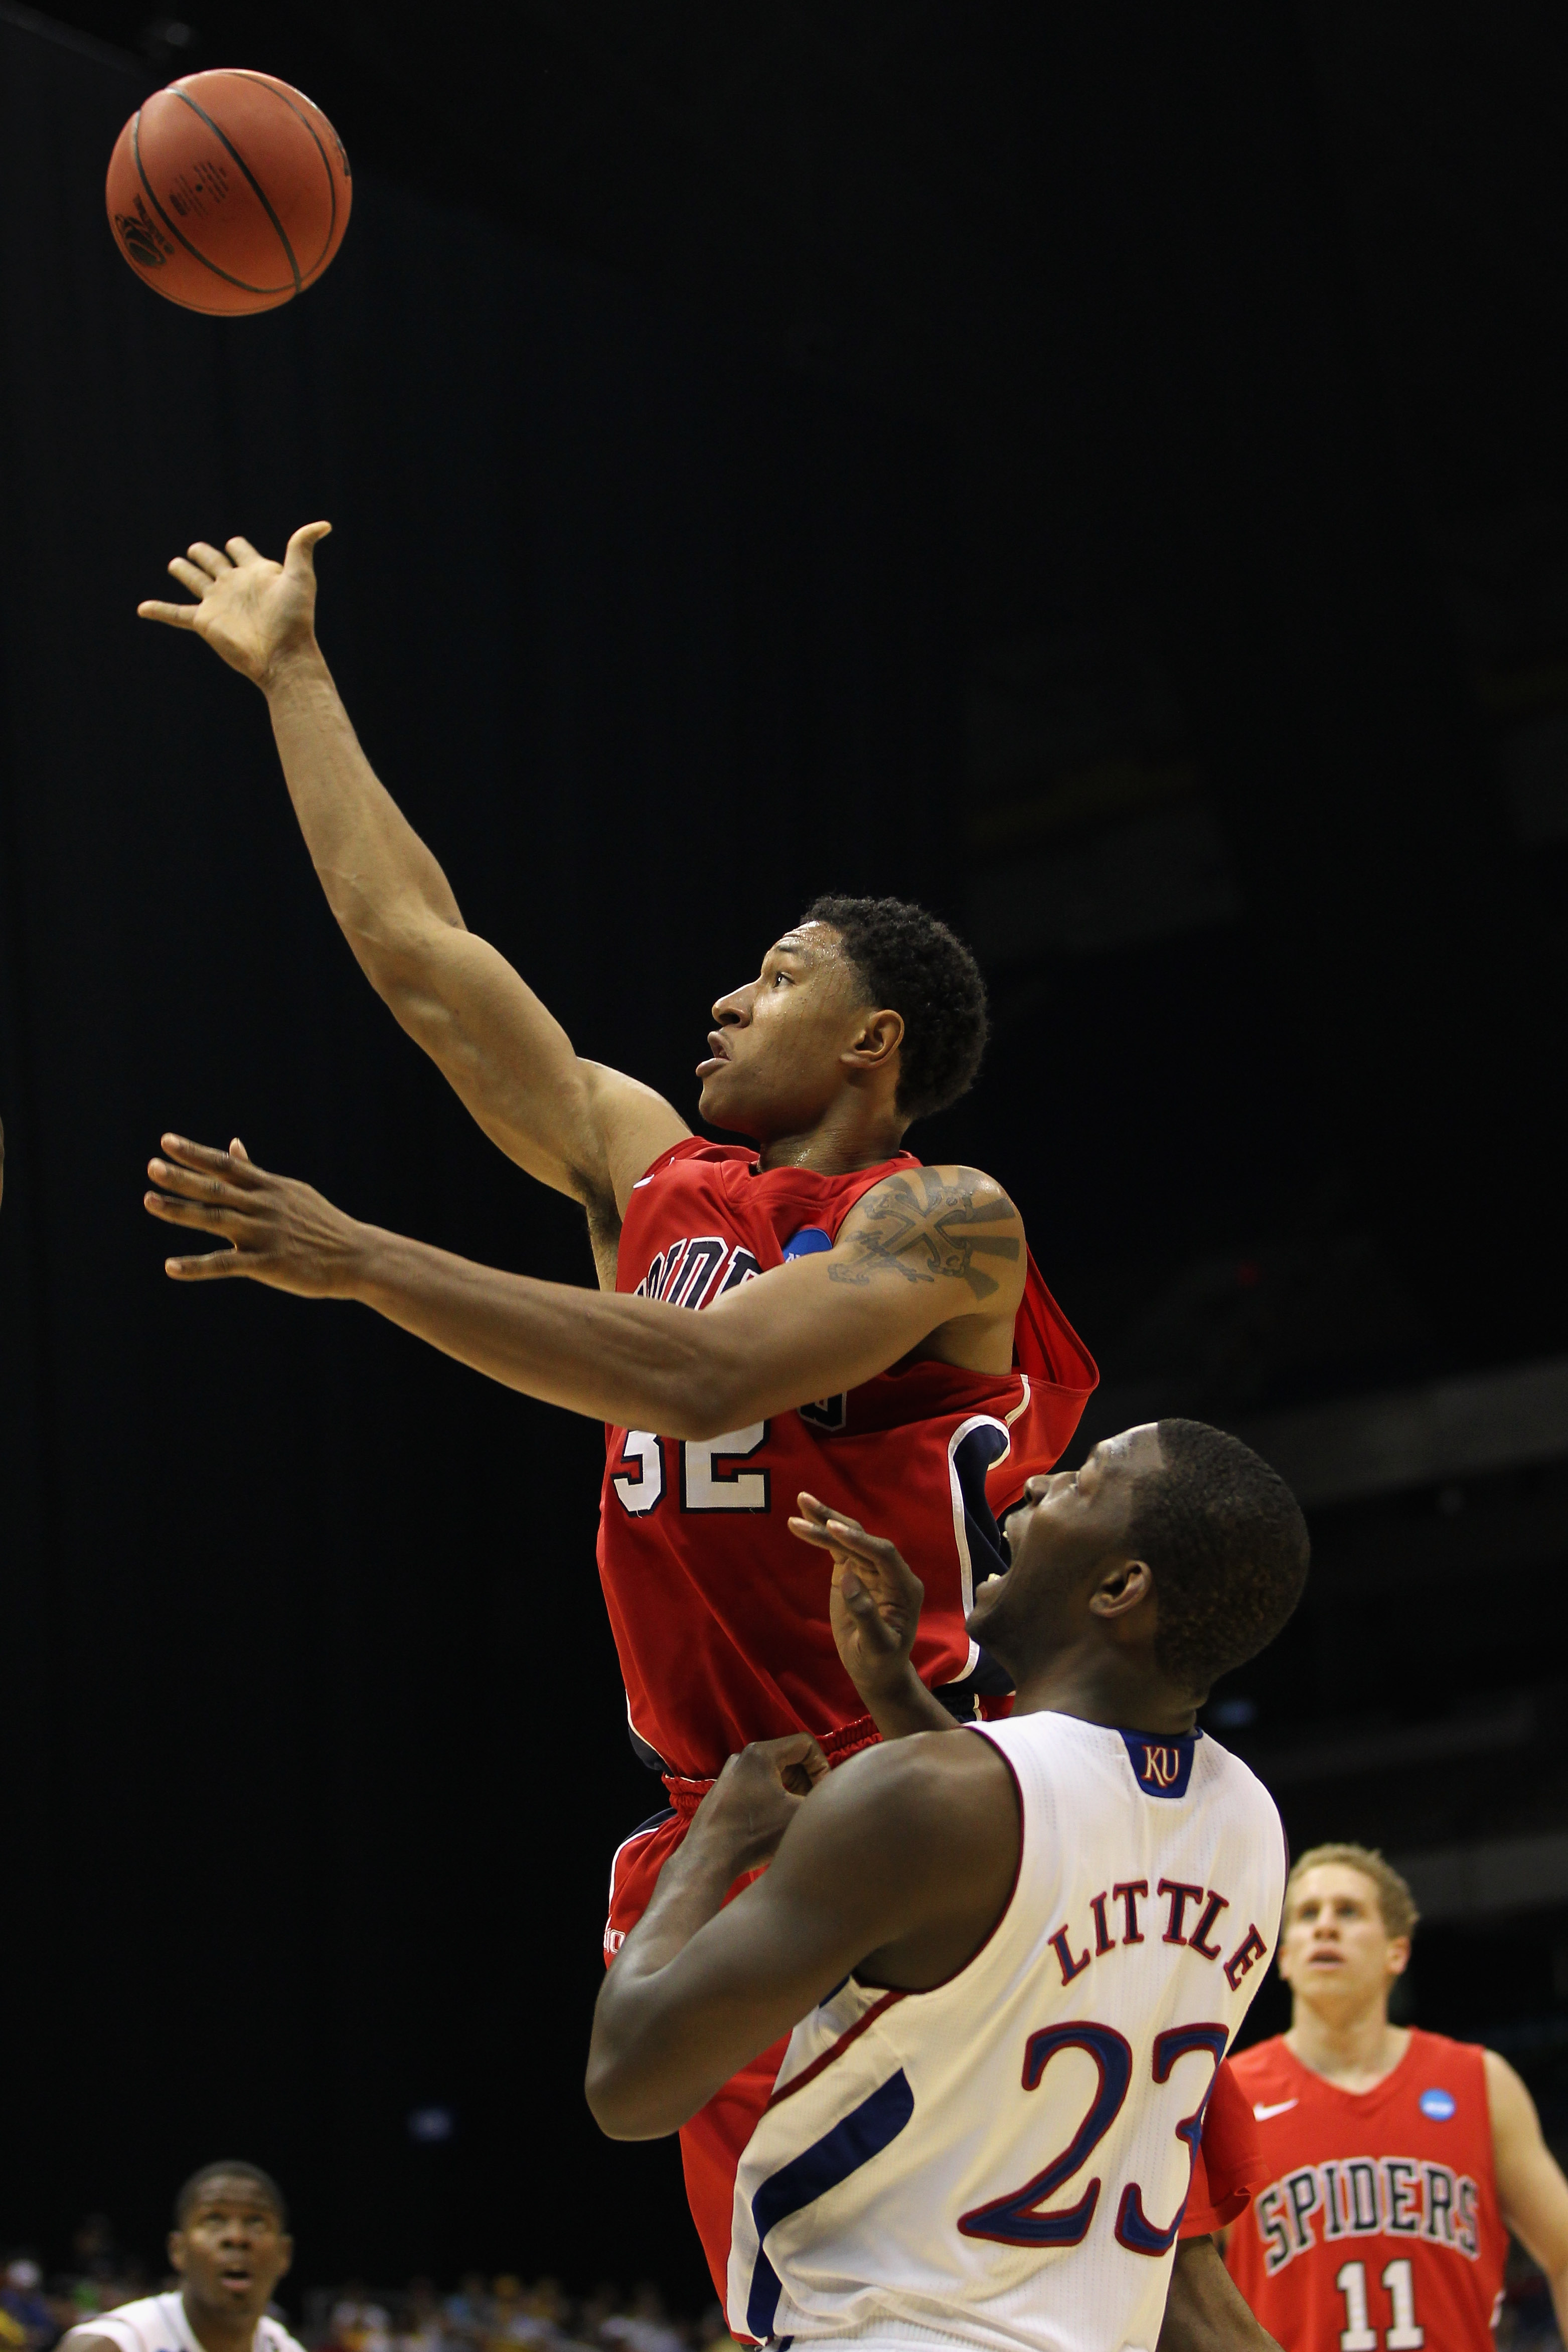 SAN ANTONIO, TX - MARCH 25:  Justin Harper #32 of the Richmond Spiders puts up a shot against Mario Little #23 of the Kansas Jayhawks during the southwest regional of the 2011 NCAA men's basketball tournament at the Alamodome on March 25, 2011 in San Anto